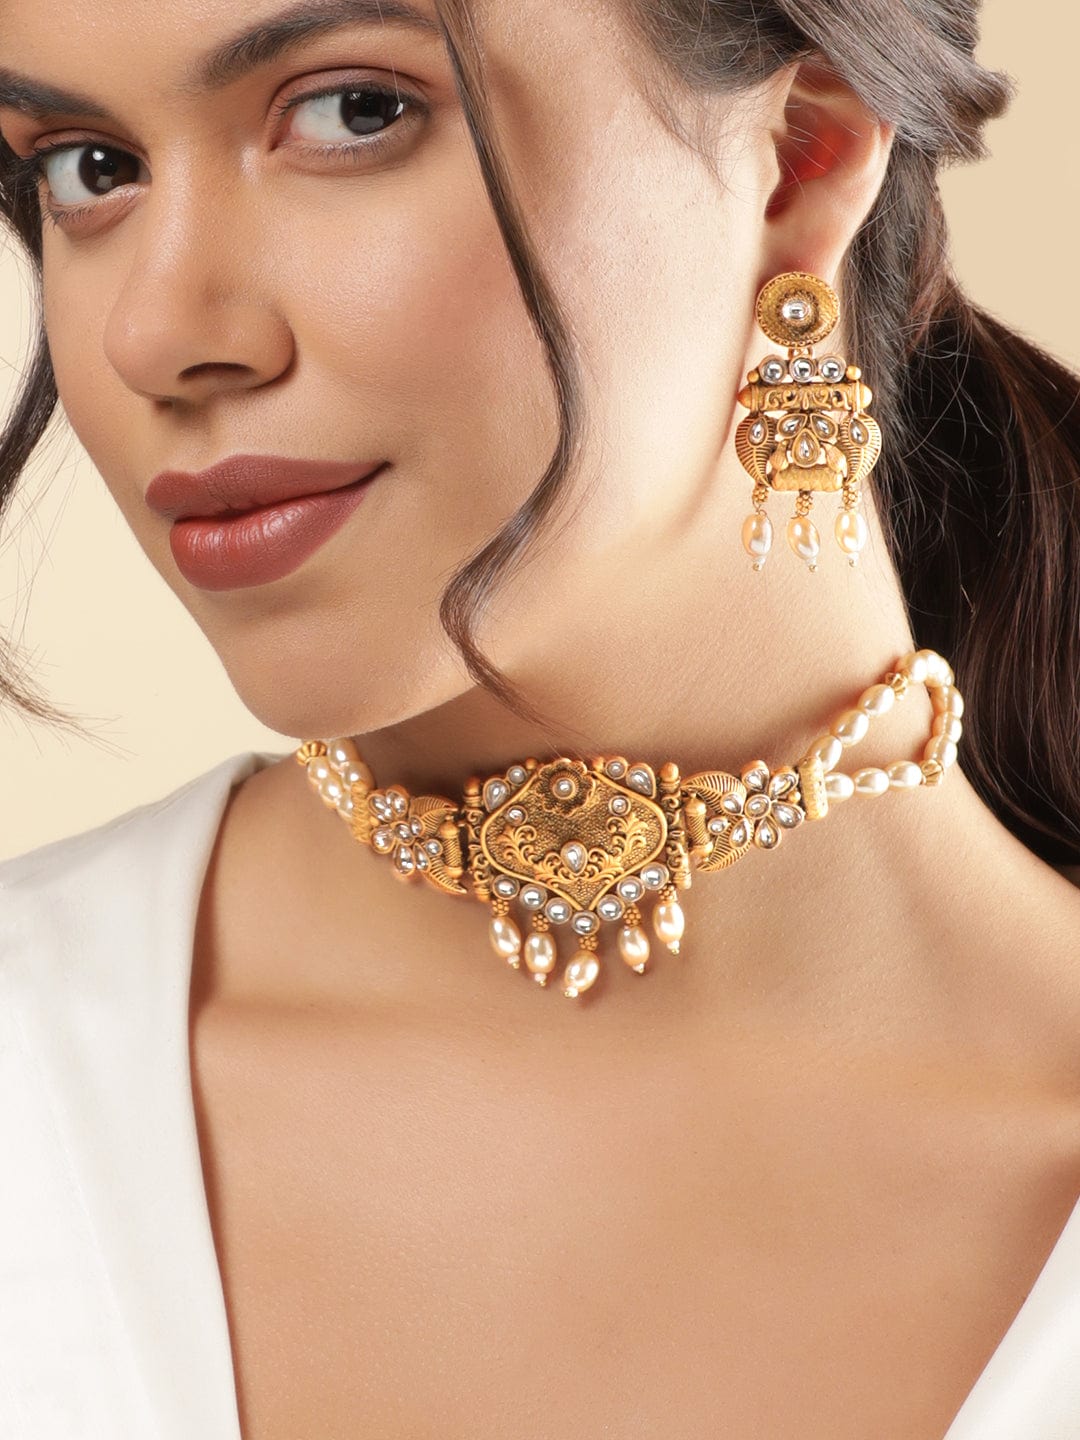 Rubans Gold-Toned Pendant with Off-White Beads Chain Choker Set Choker, Choker set & Kundan Choker set